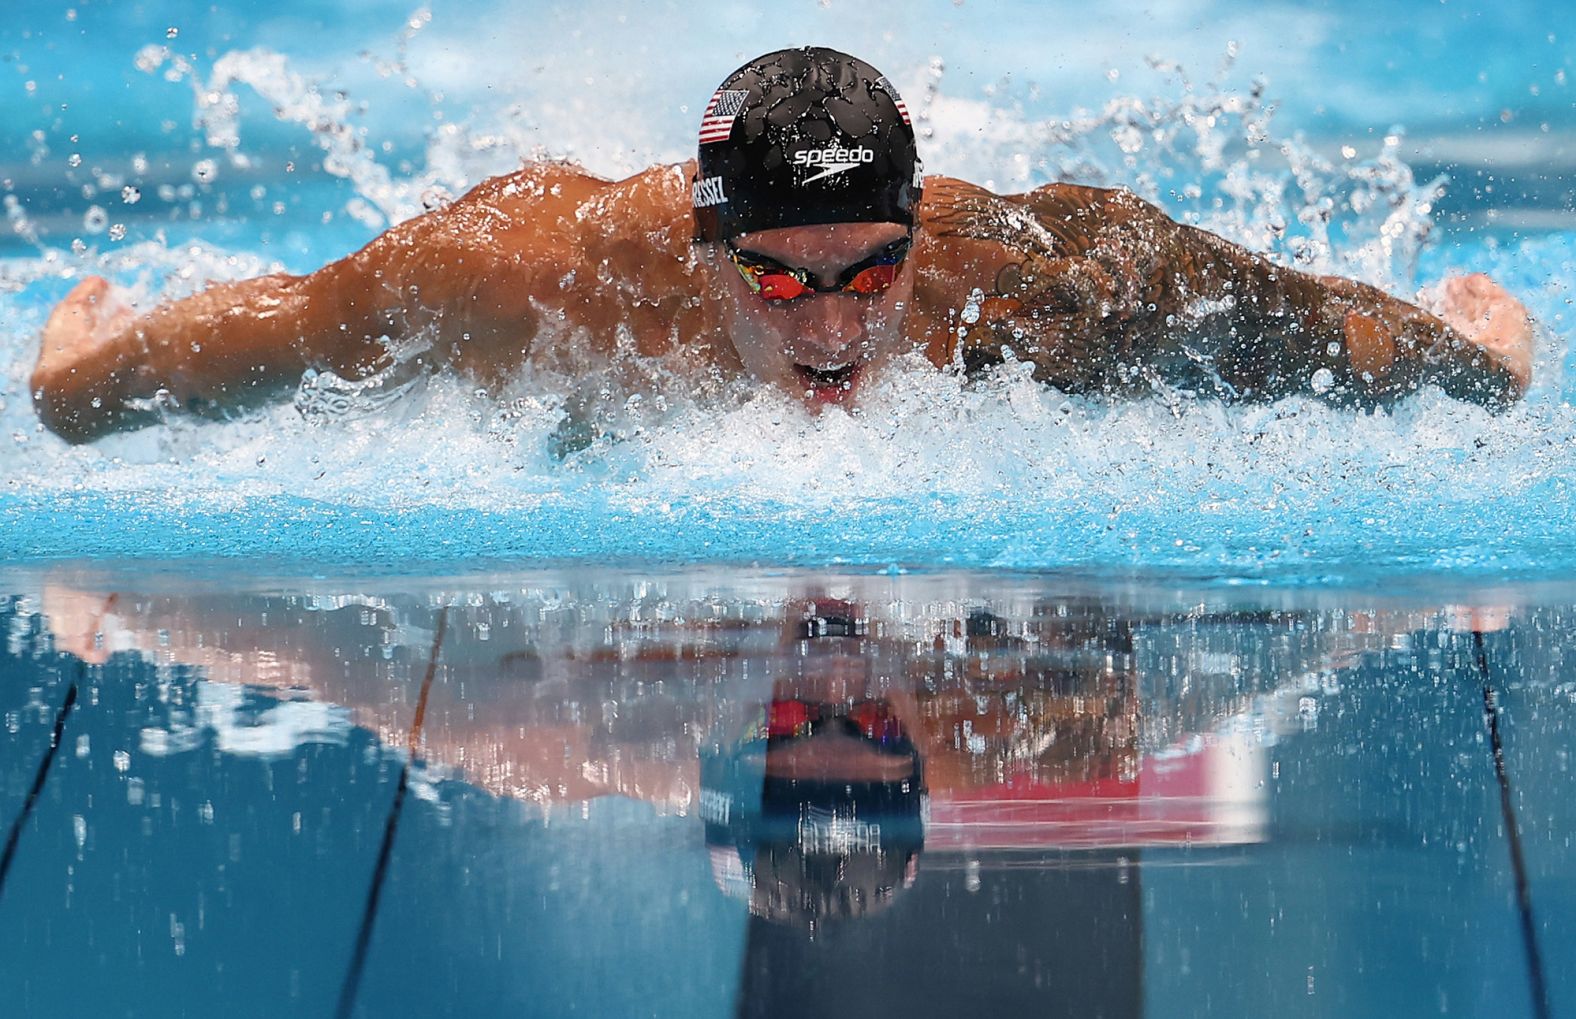 American swimmer Caeleb Dressel competes in the 100-meter butterfly on July 31. He finished in 49.45 seconds, <a href="index.php?page=&url=https%3A%2F%2Fwww.cnn.com%2Fworld%2Flive-news%2Ftokyo-2020-olympics-07-30-21-spt%2Fh_4199d75e43fa3fccdfcca6cb47520ebf" target="_blank">winning gold and breaking his own world record in the process.</a>